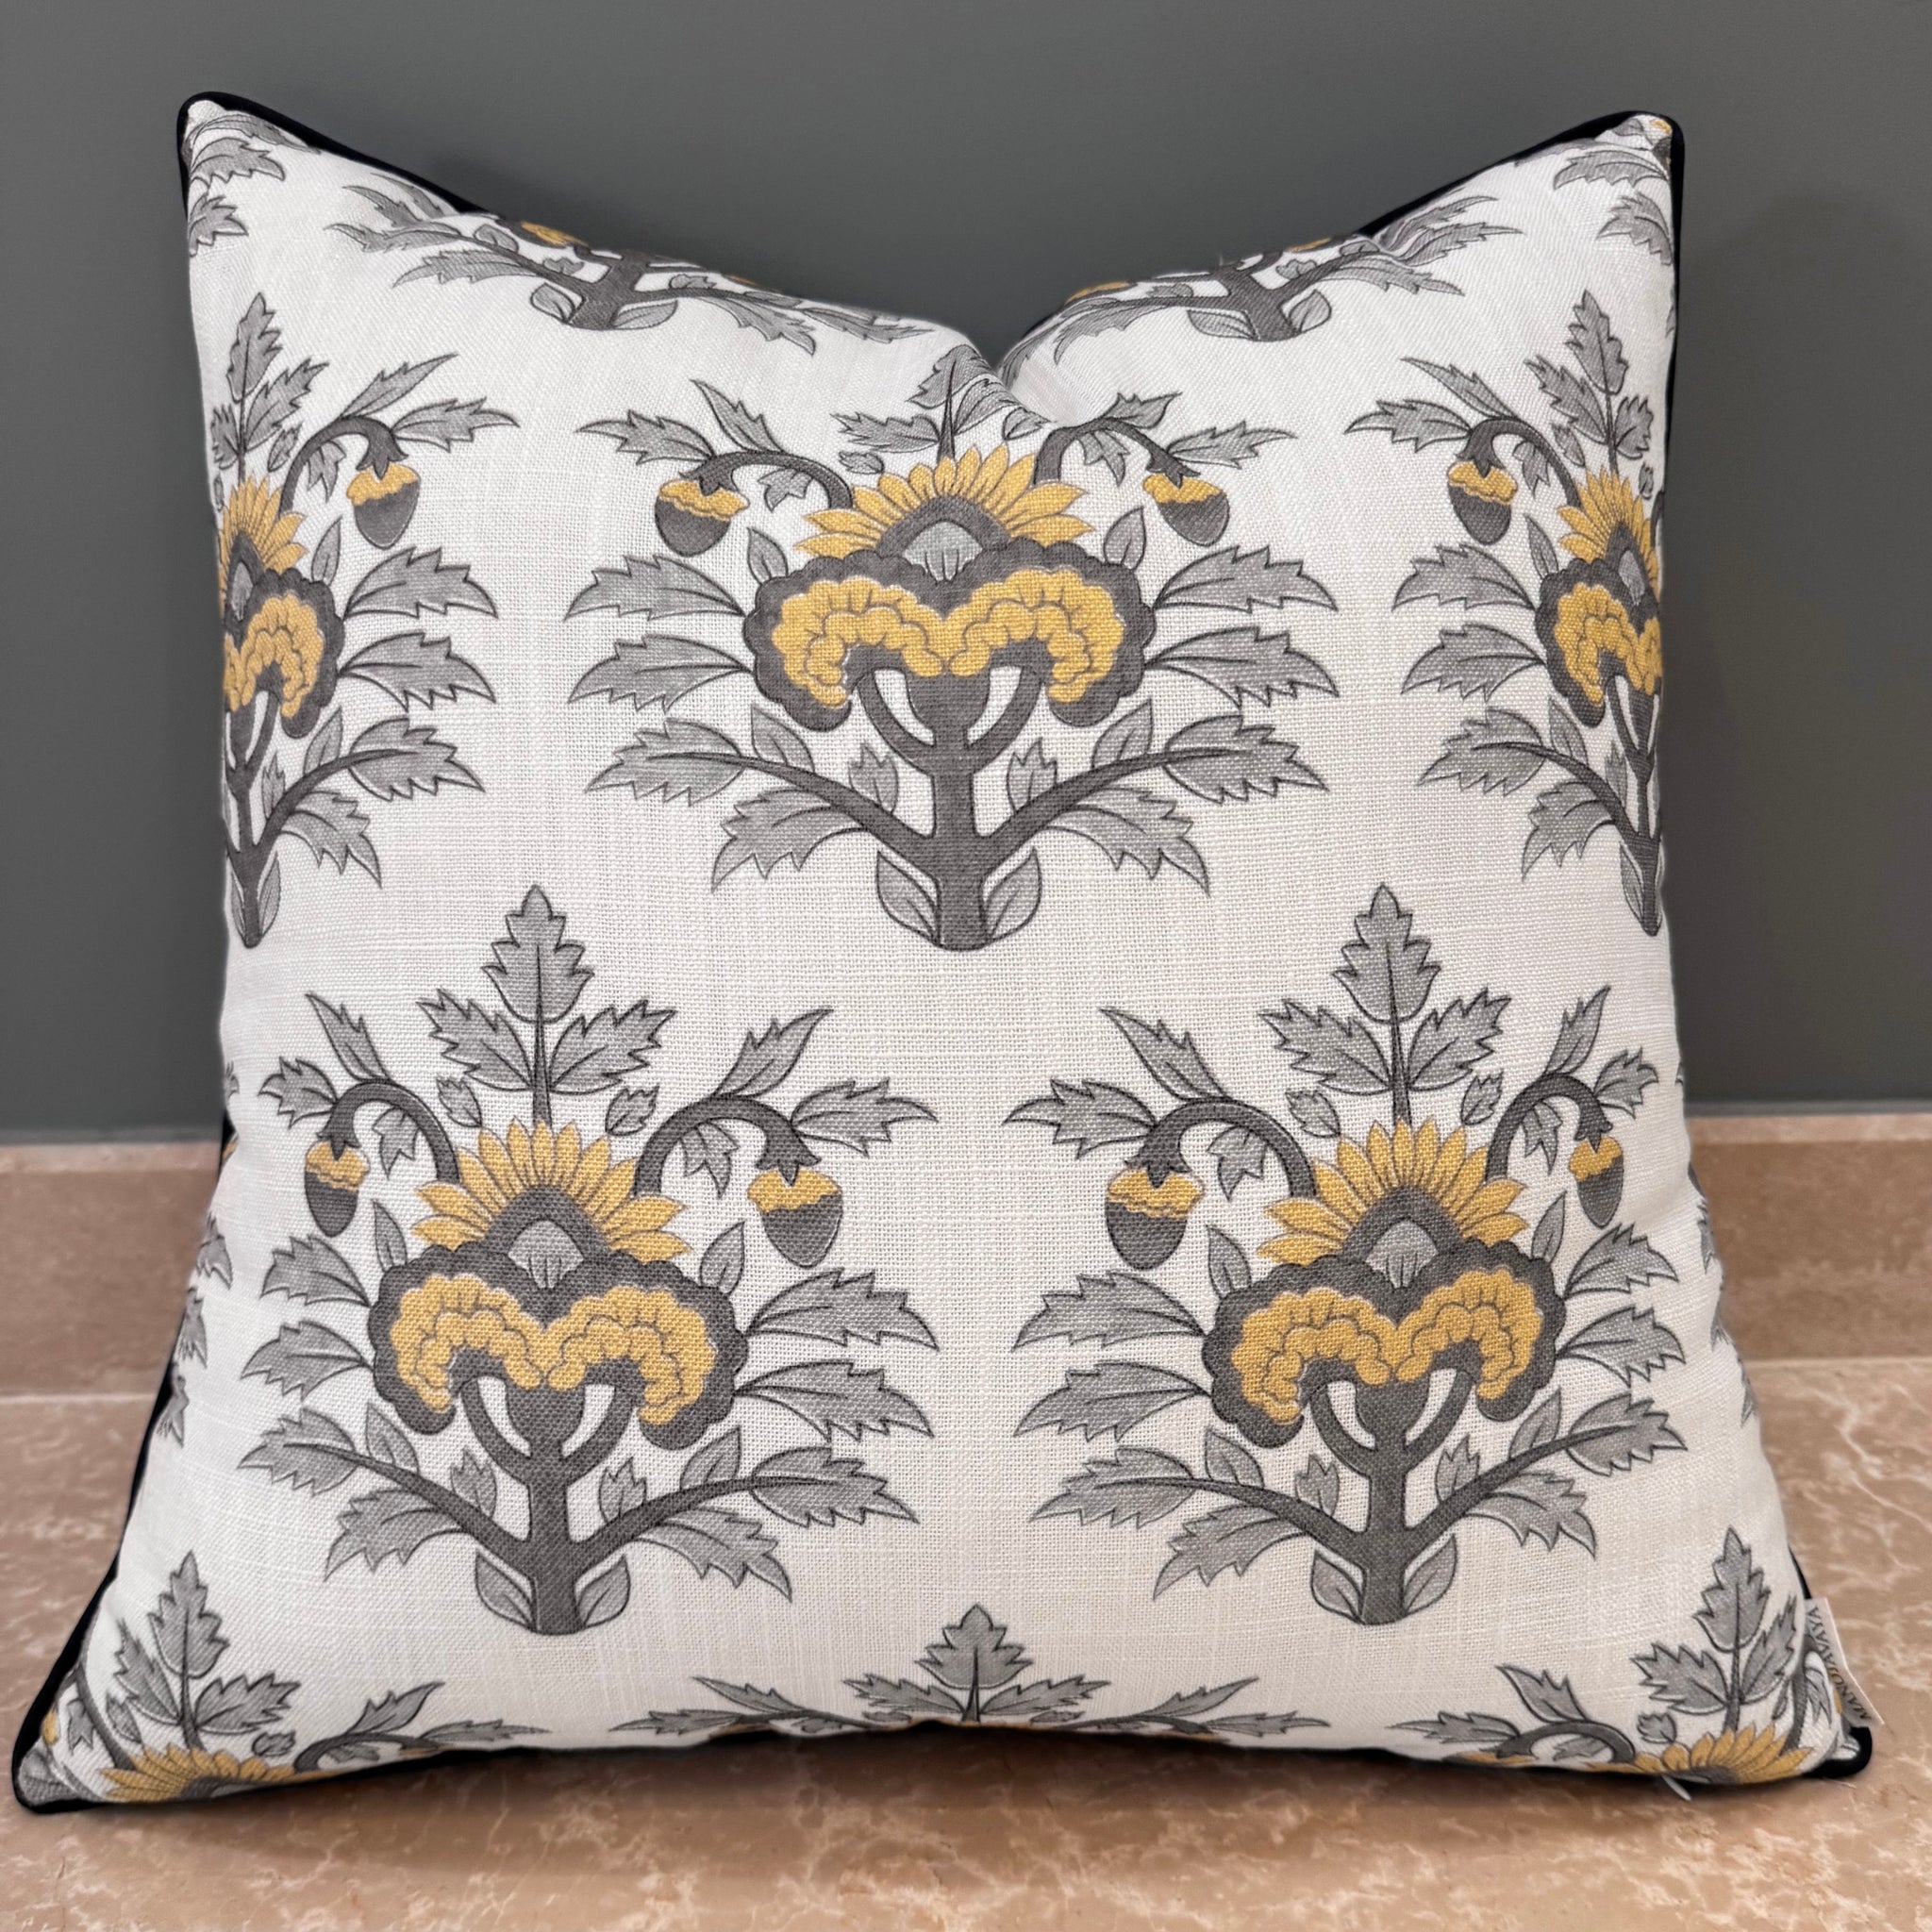 KYOMI MUSTARD Butter cup Cotton Printed Cushion Cover